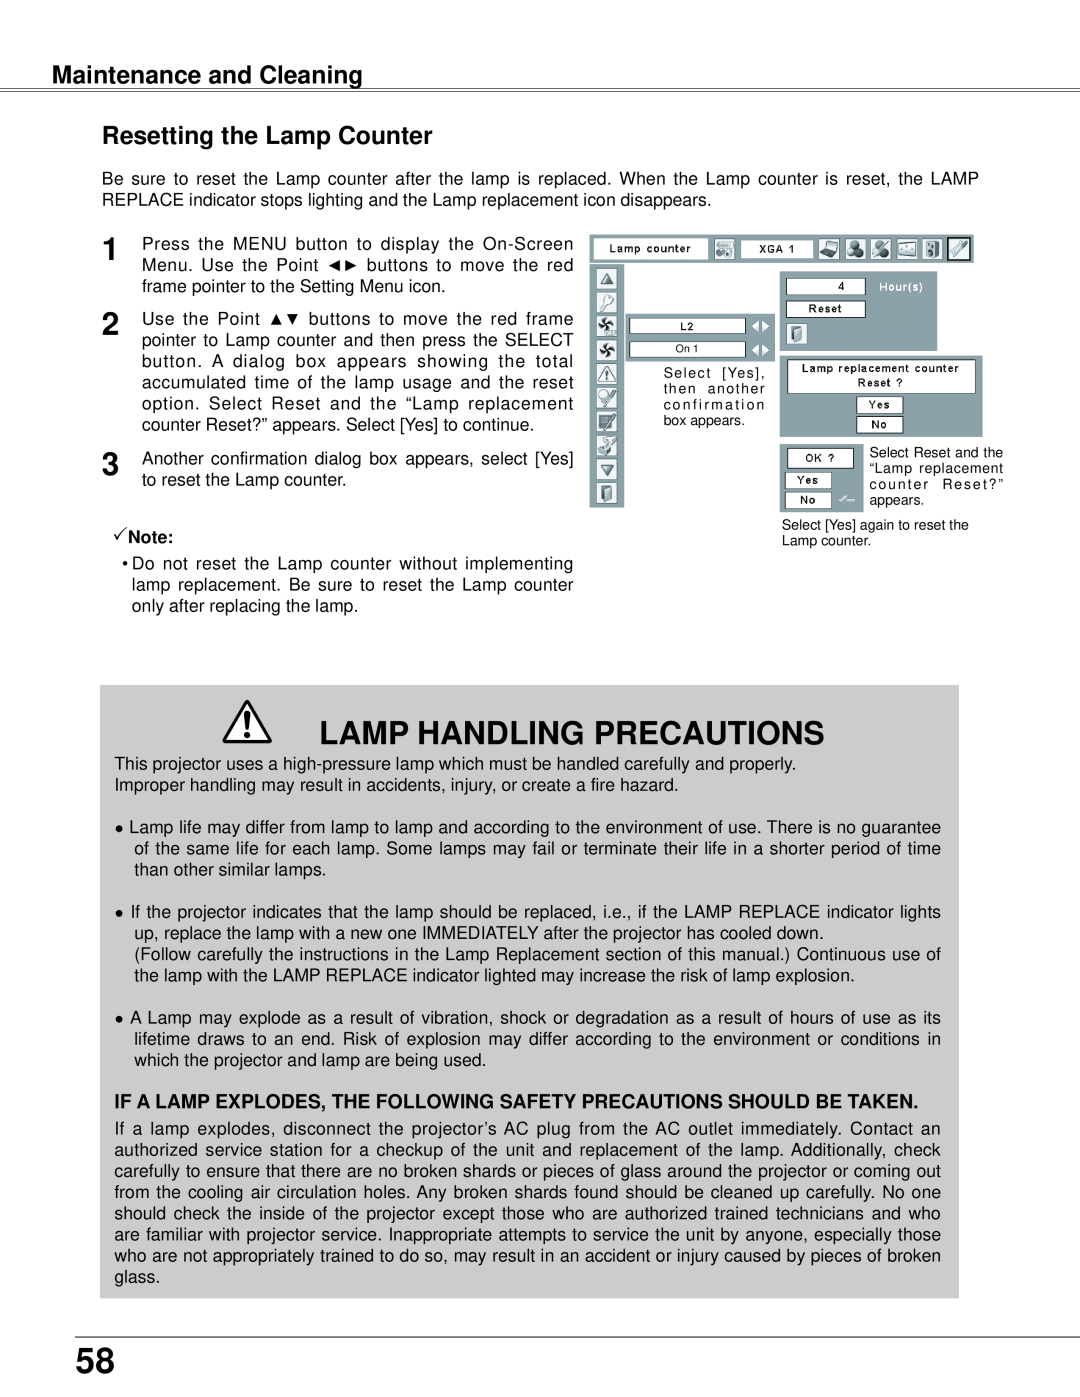 Eiki LC-XB42 owner manual Maintenance and Cleaning Resetting the Lamp Counter, Lamp Handling Precautions, Note 